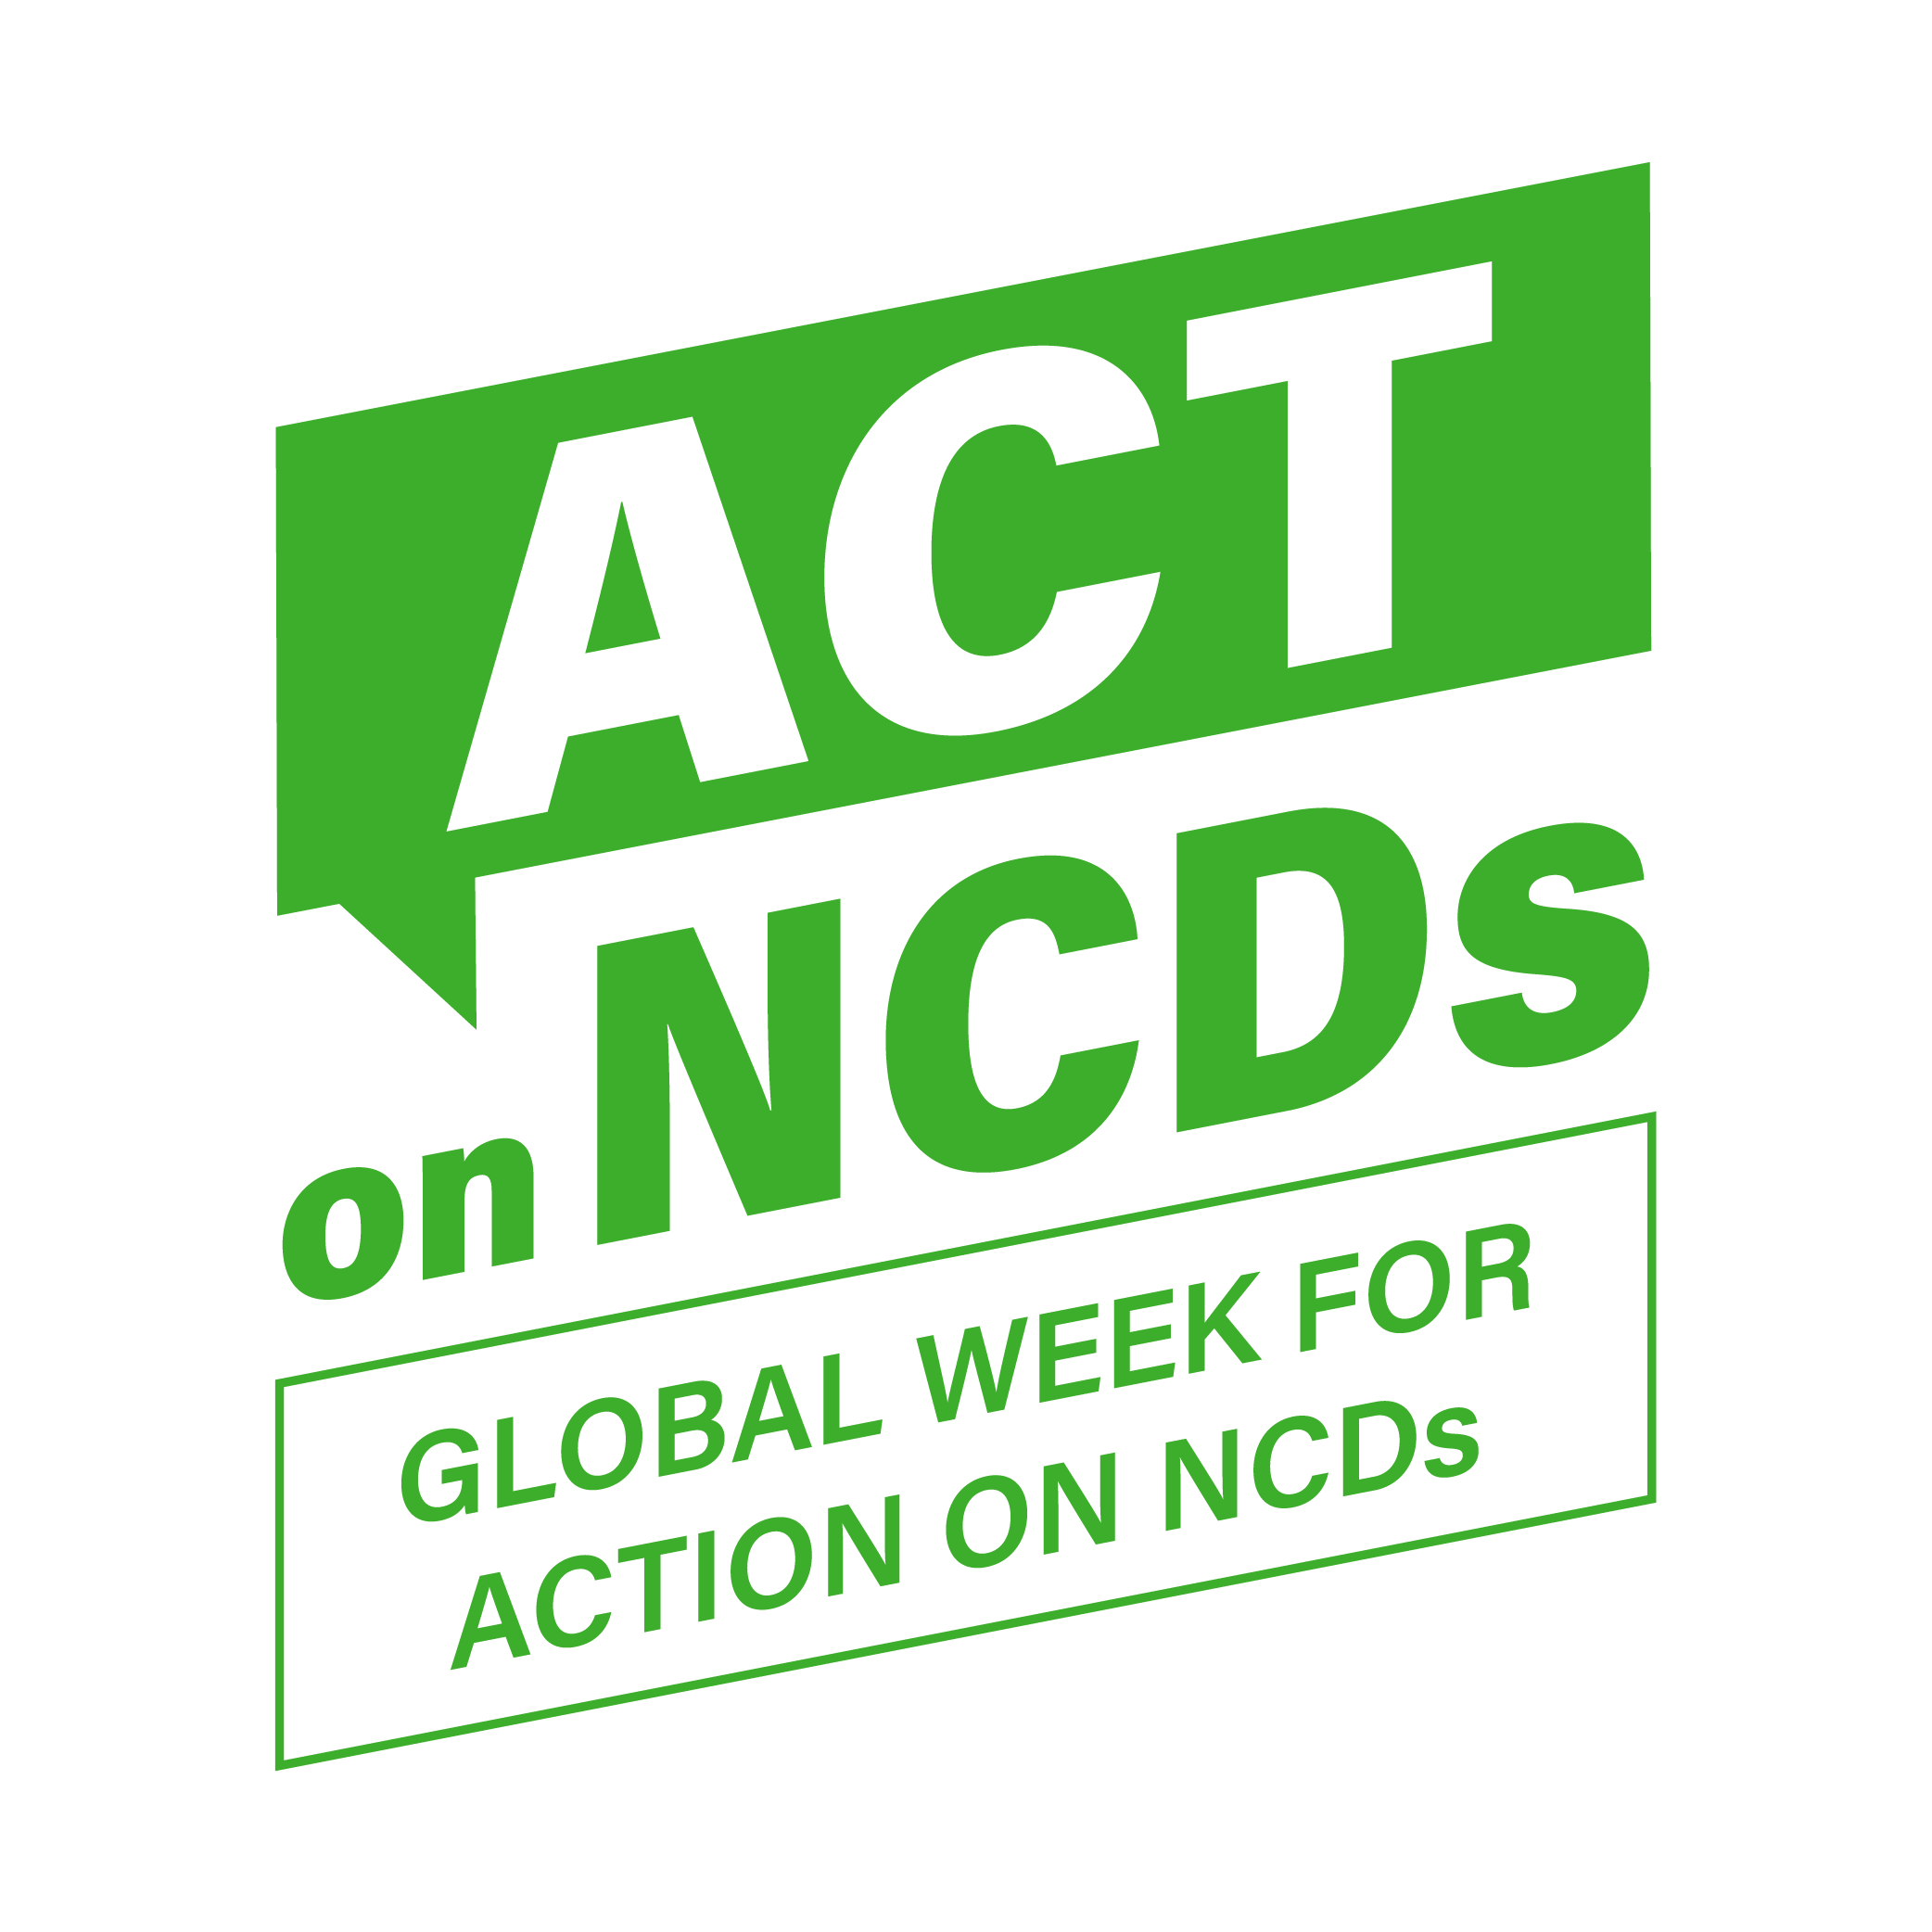 Act on NCDS - Engaging Communities logo green